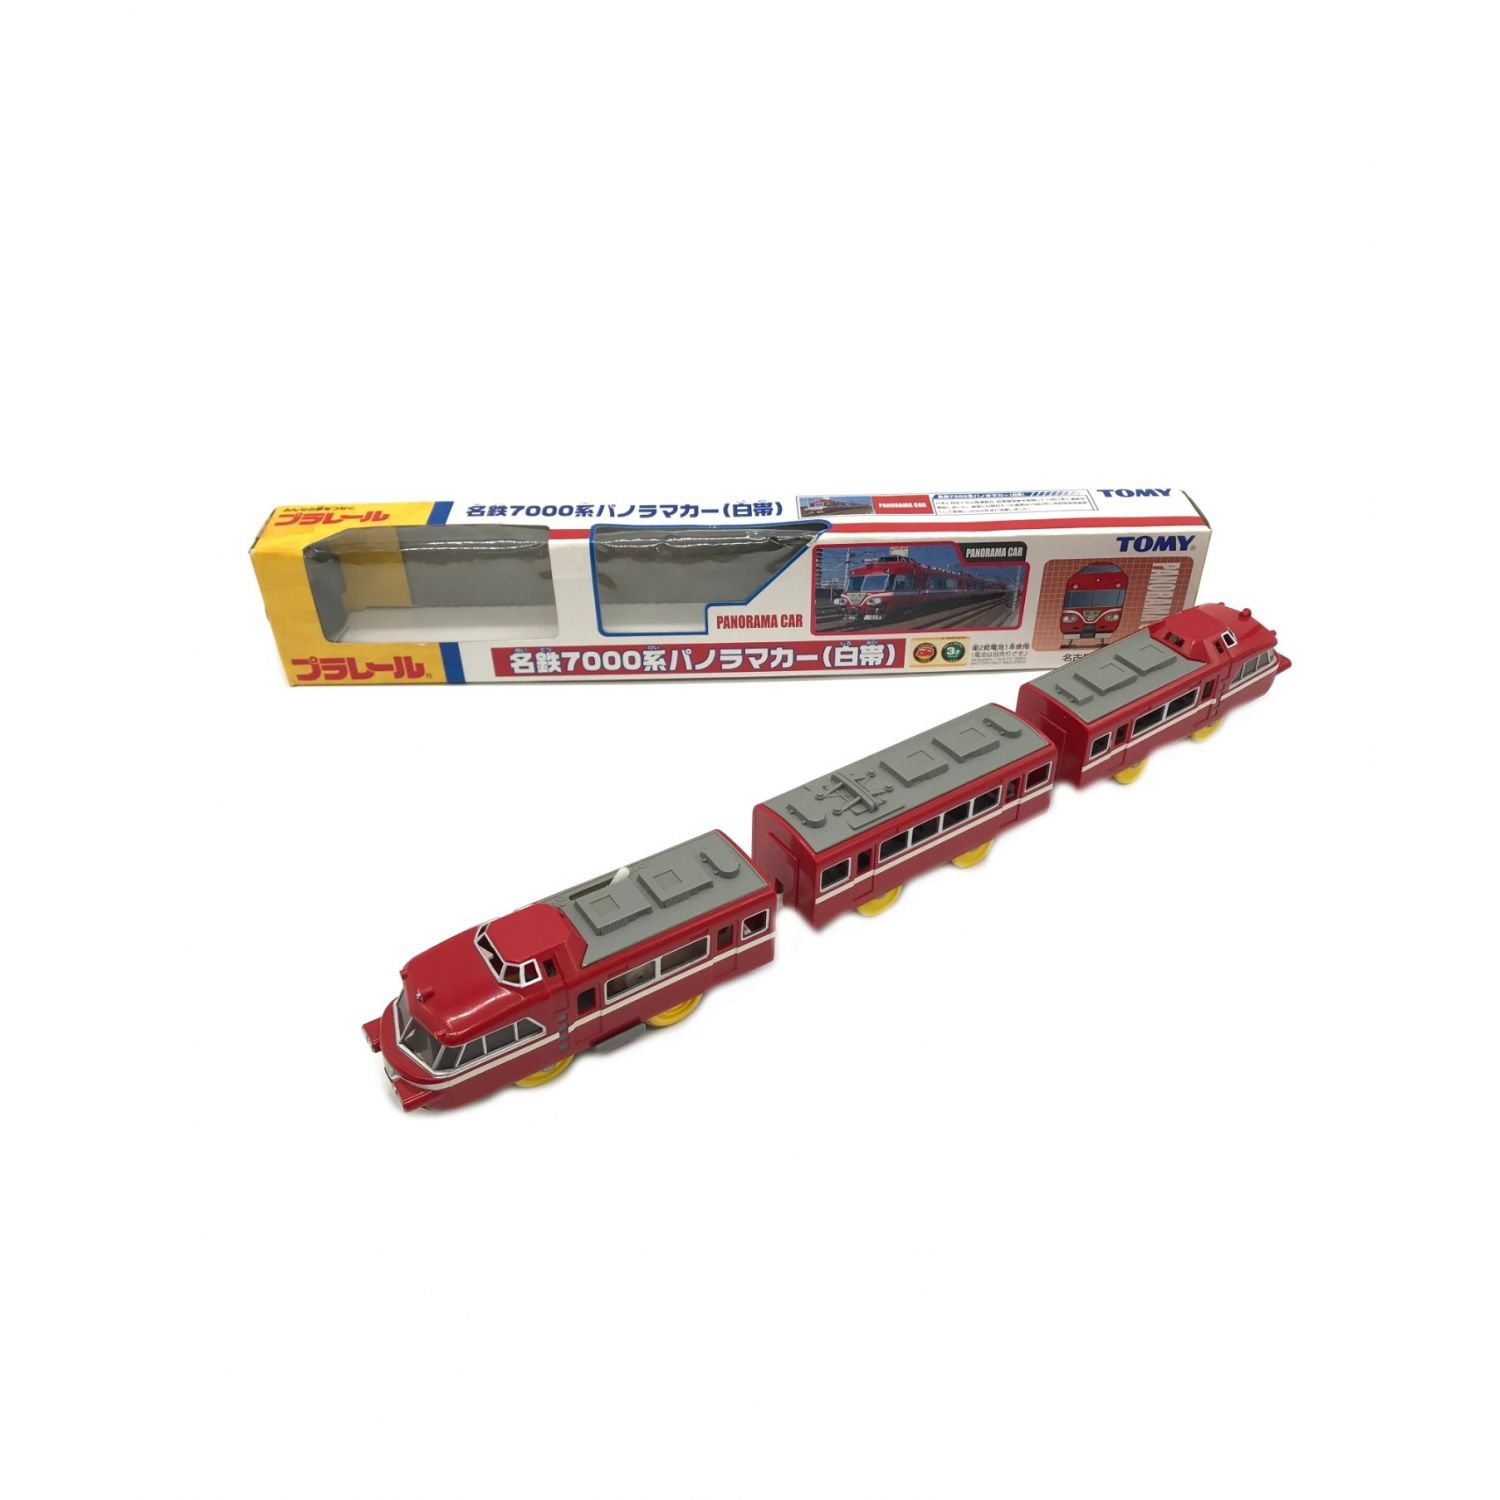 TOMY (トミー) プラレール 車両セット 名鉄7000系パノラマカー（白帯 